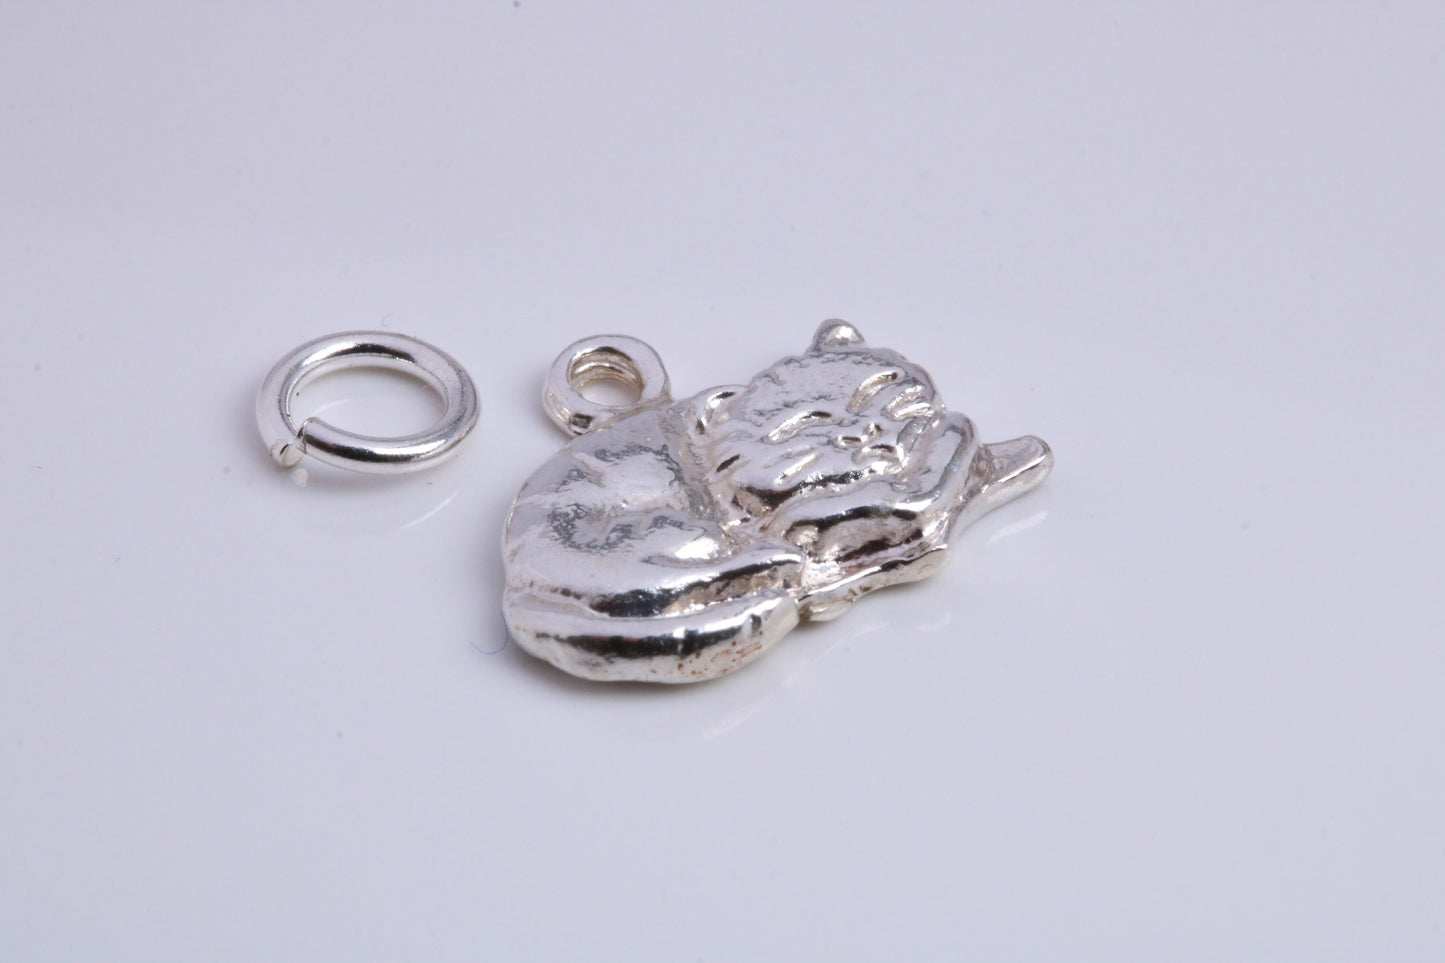 Cat Charm, Traditional Charm, Made from Solid 925 Grade Sterling Silver, Complete with Attachment Link